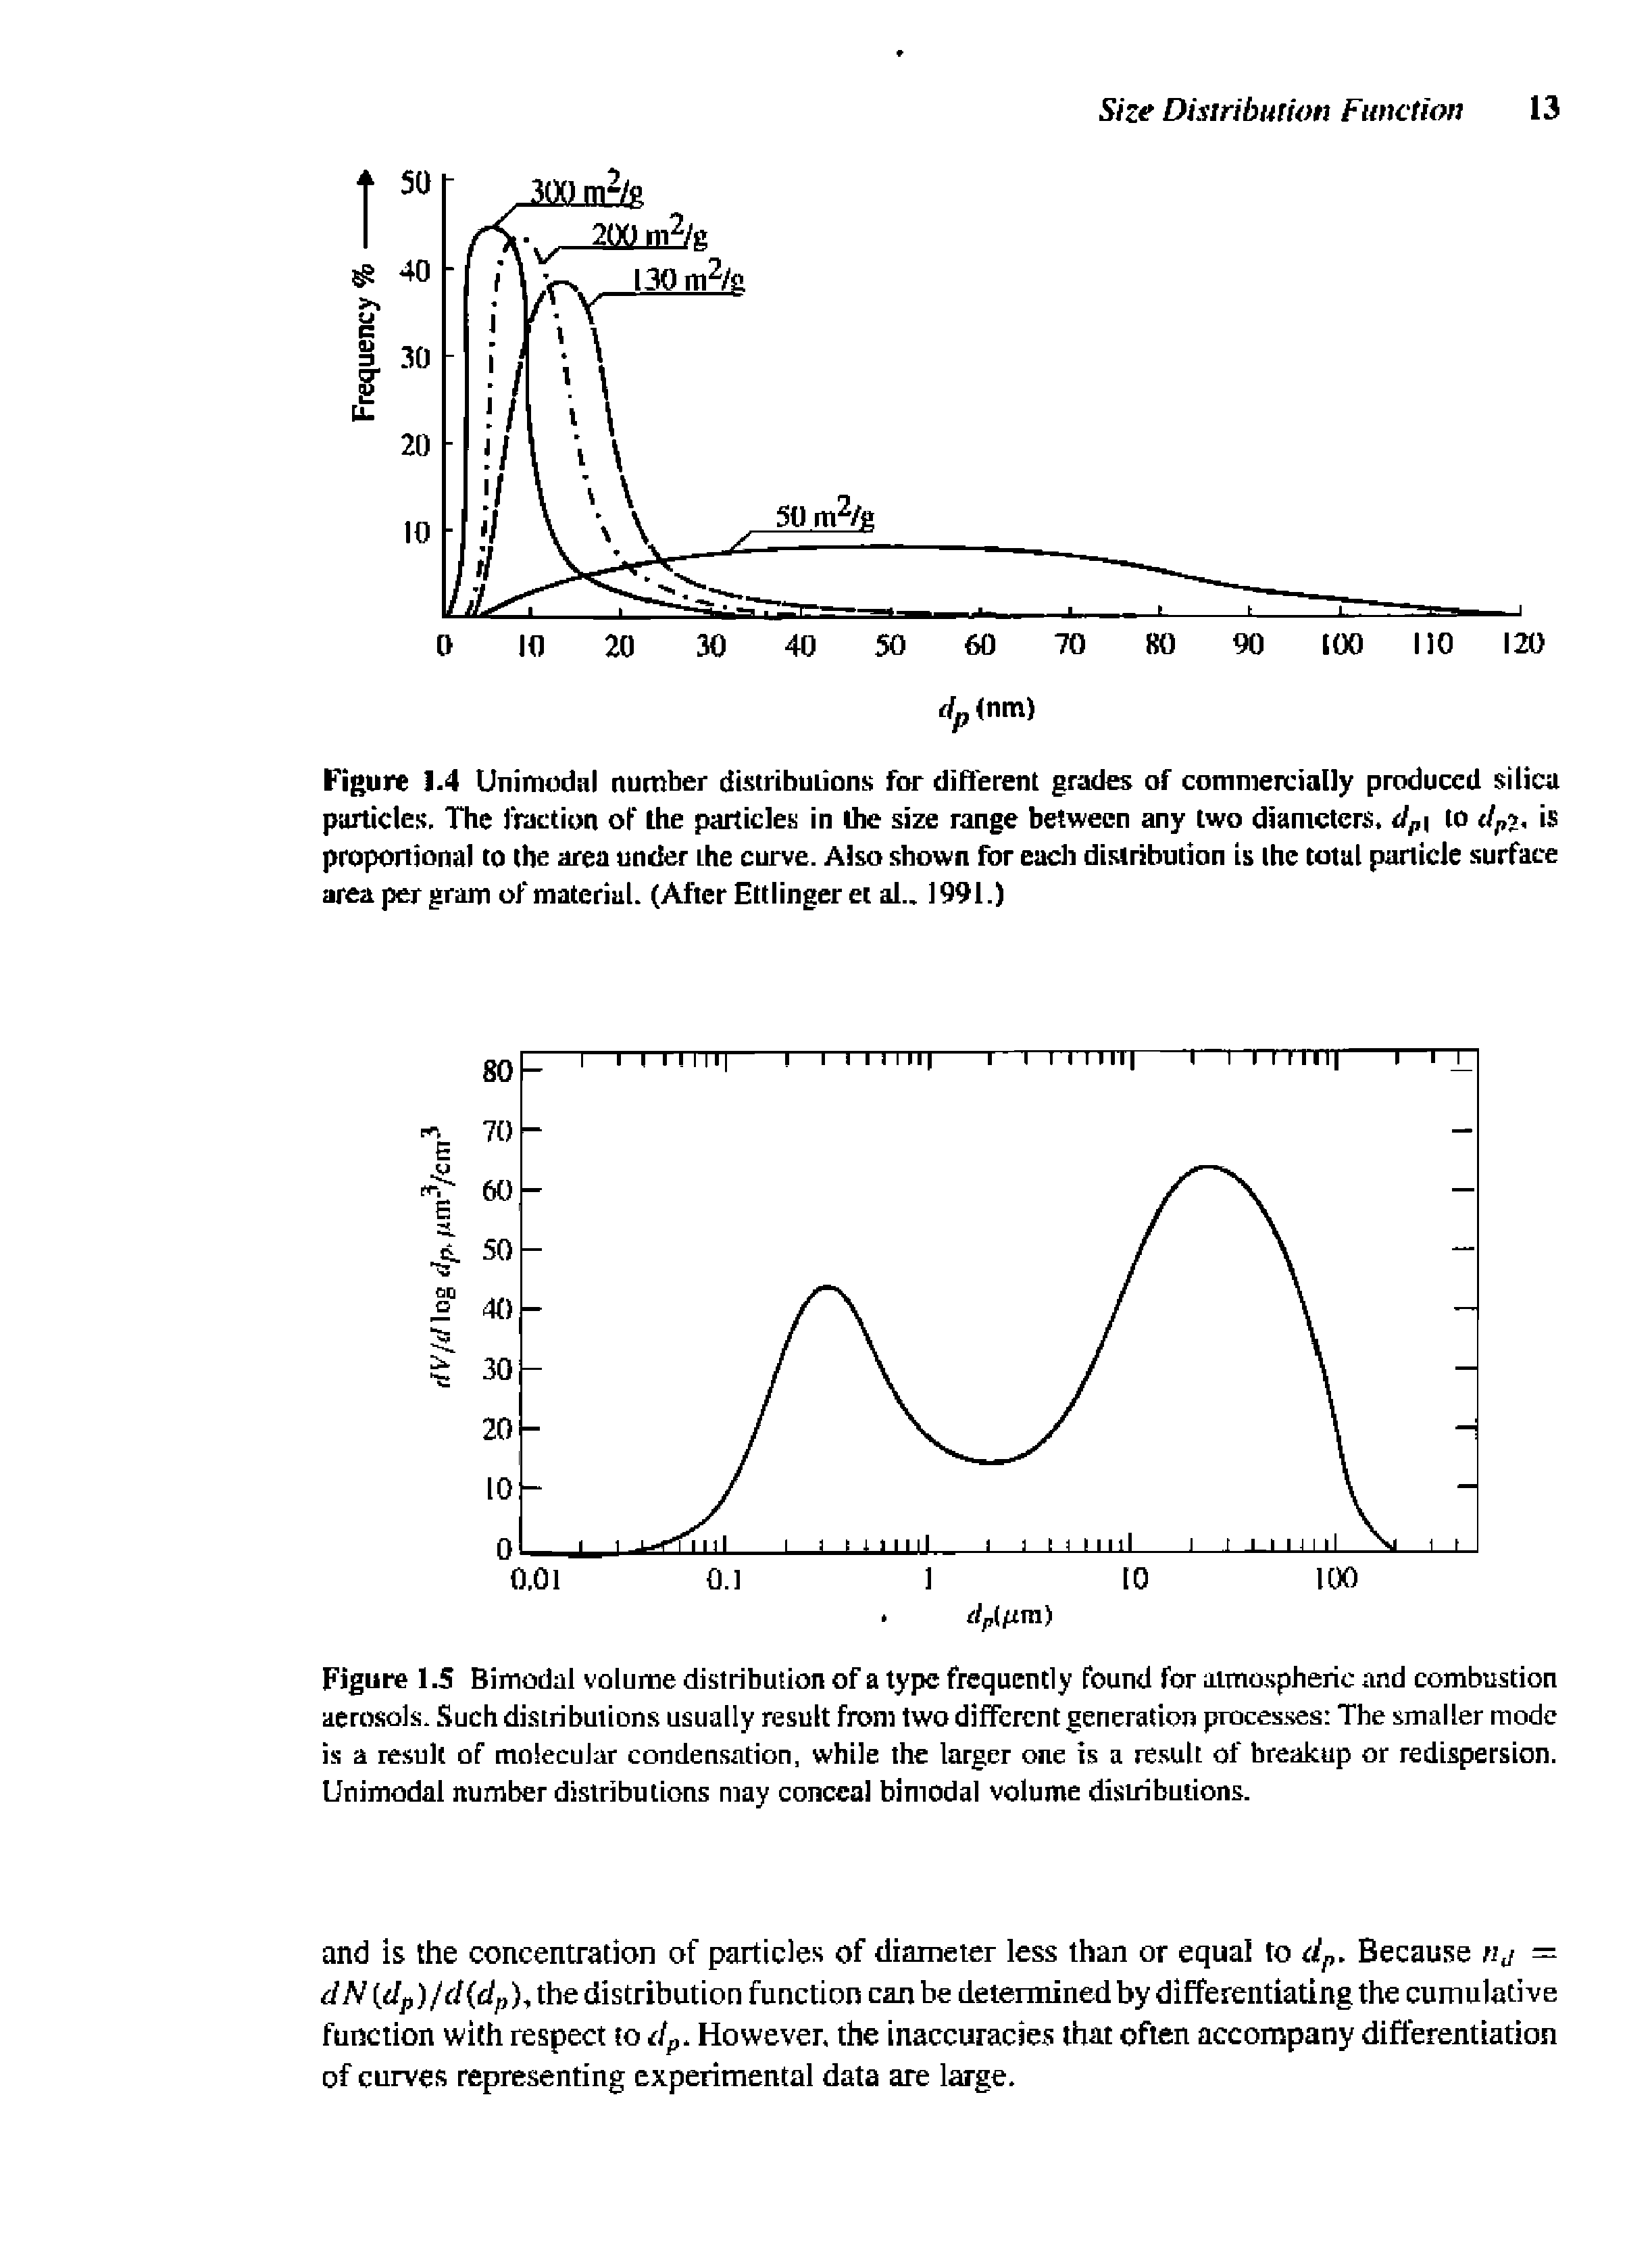 Figure 1.4 Unimodiil number dLstribuiions for difl erent grades of comniercially produced silica particles. The fraction of the particles in the size range between any two diameters, tlpy to is proportional to the area under the curve. Also shown for eadi distribution is the total particle surface area per gram of material. (After Ettlinger et al.. 1991.)...